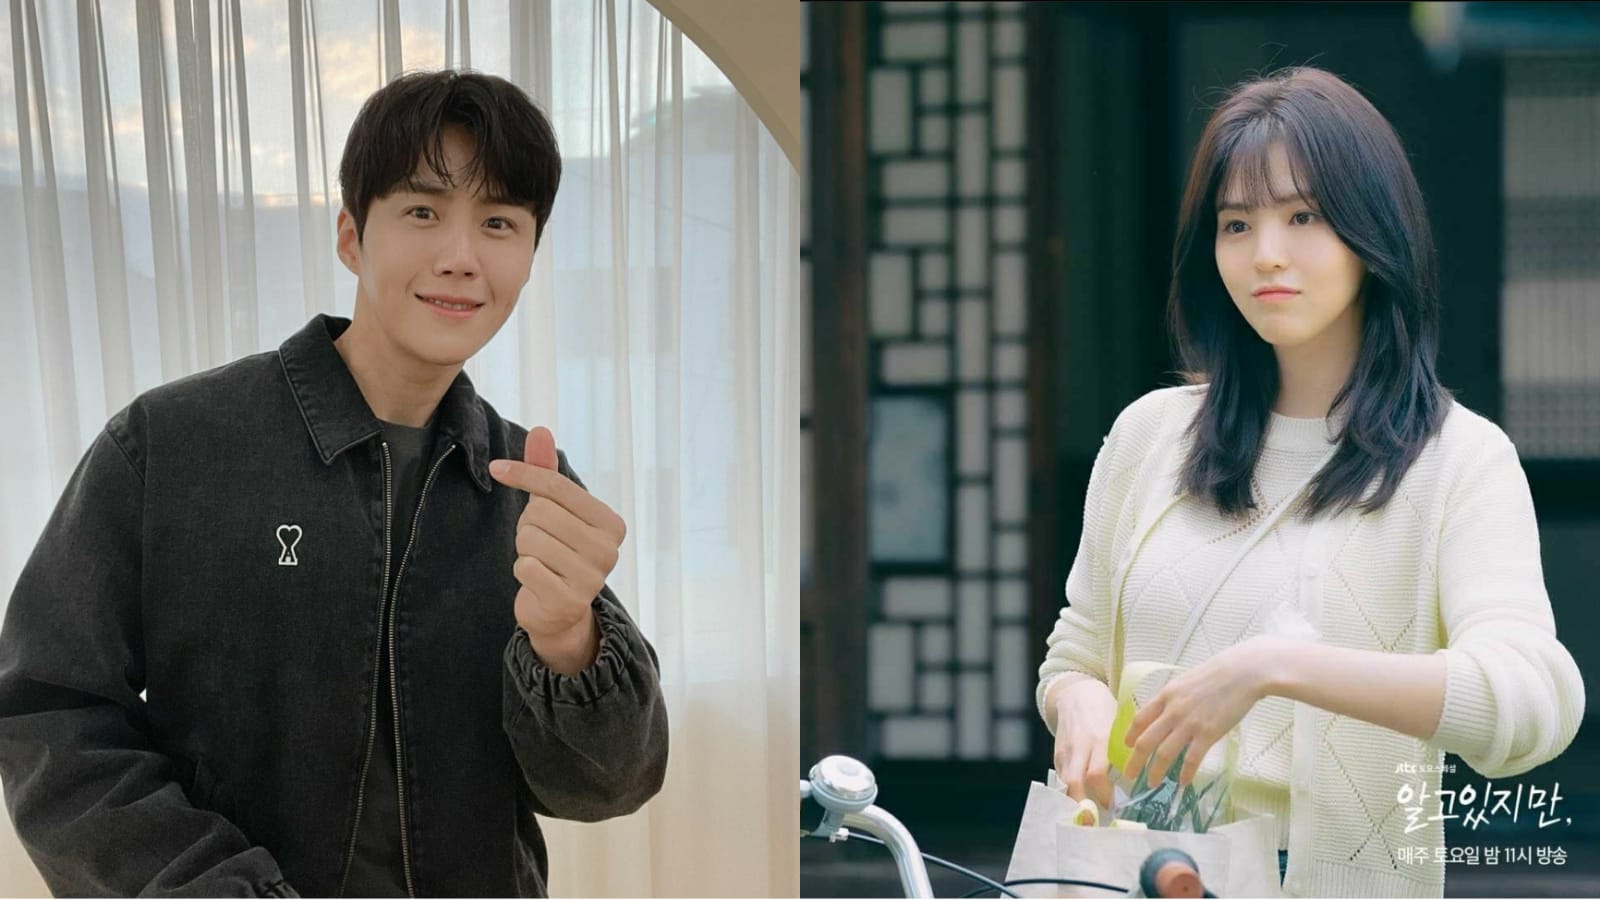 Kim Seon Ho's Story Is Said to Have Resemblance to Yoo Nabi's Character in 'NEVERTHELESS', Both Are Bucin